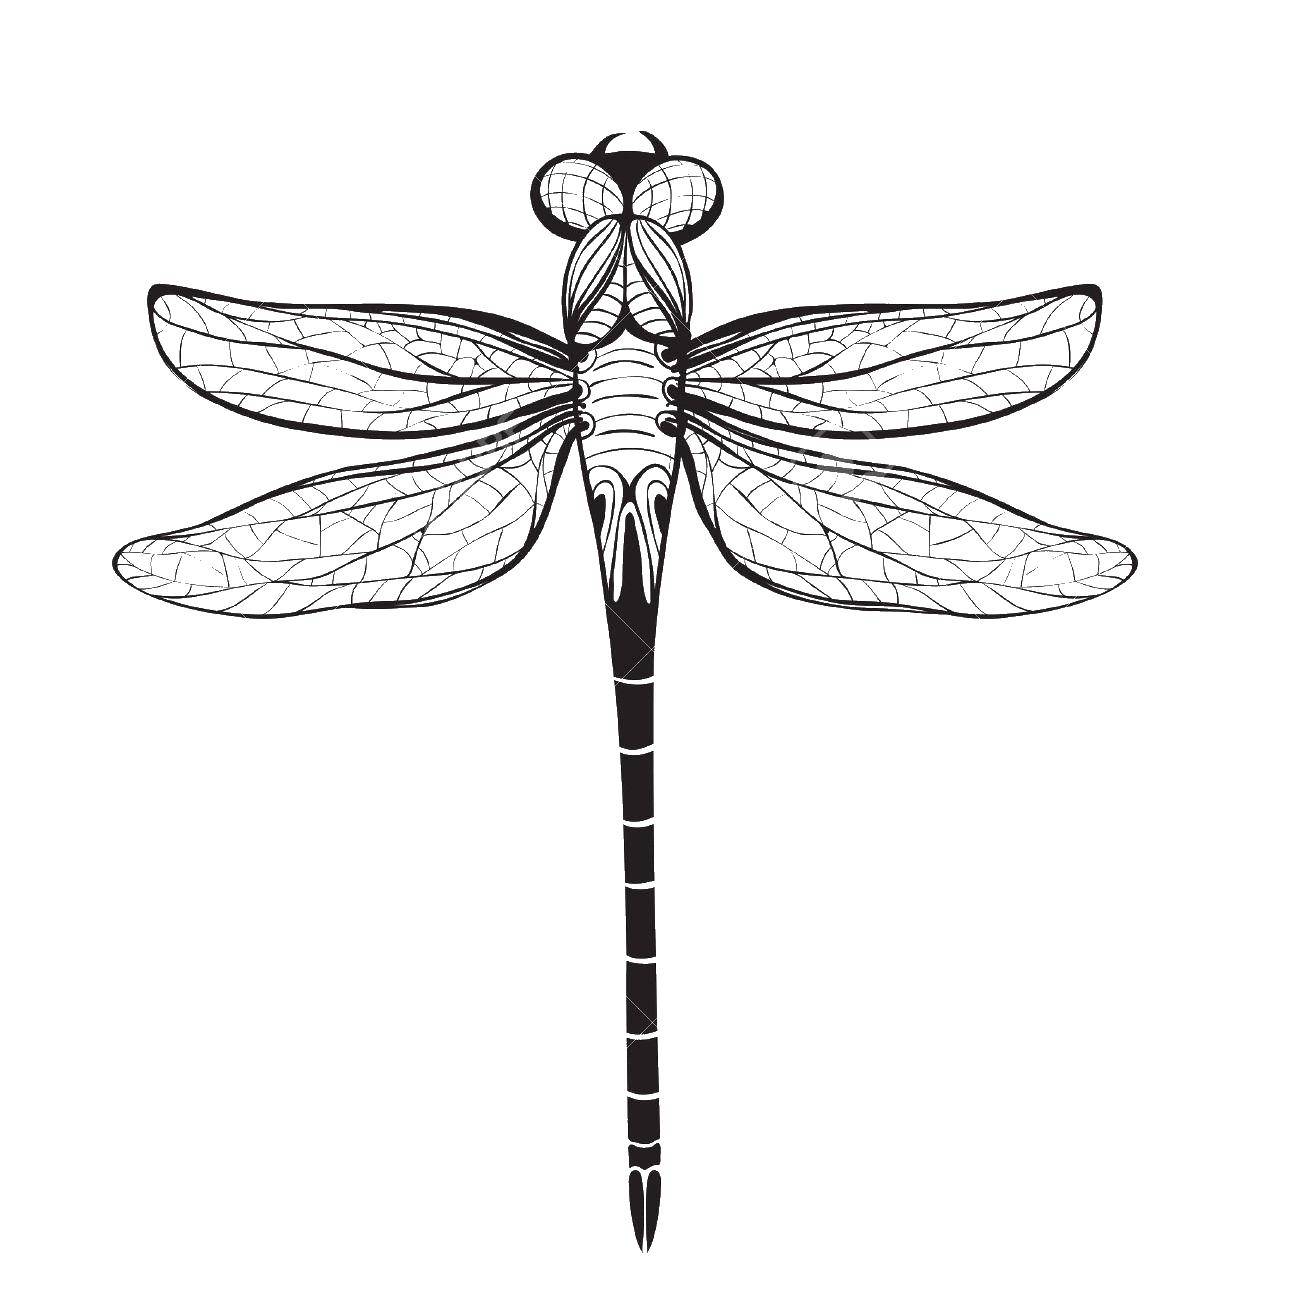 Coloring Dragonfly. Category The contours insects. Tags:  dragonfly.